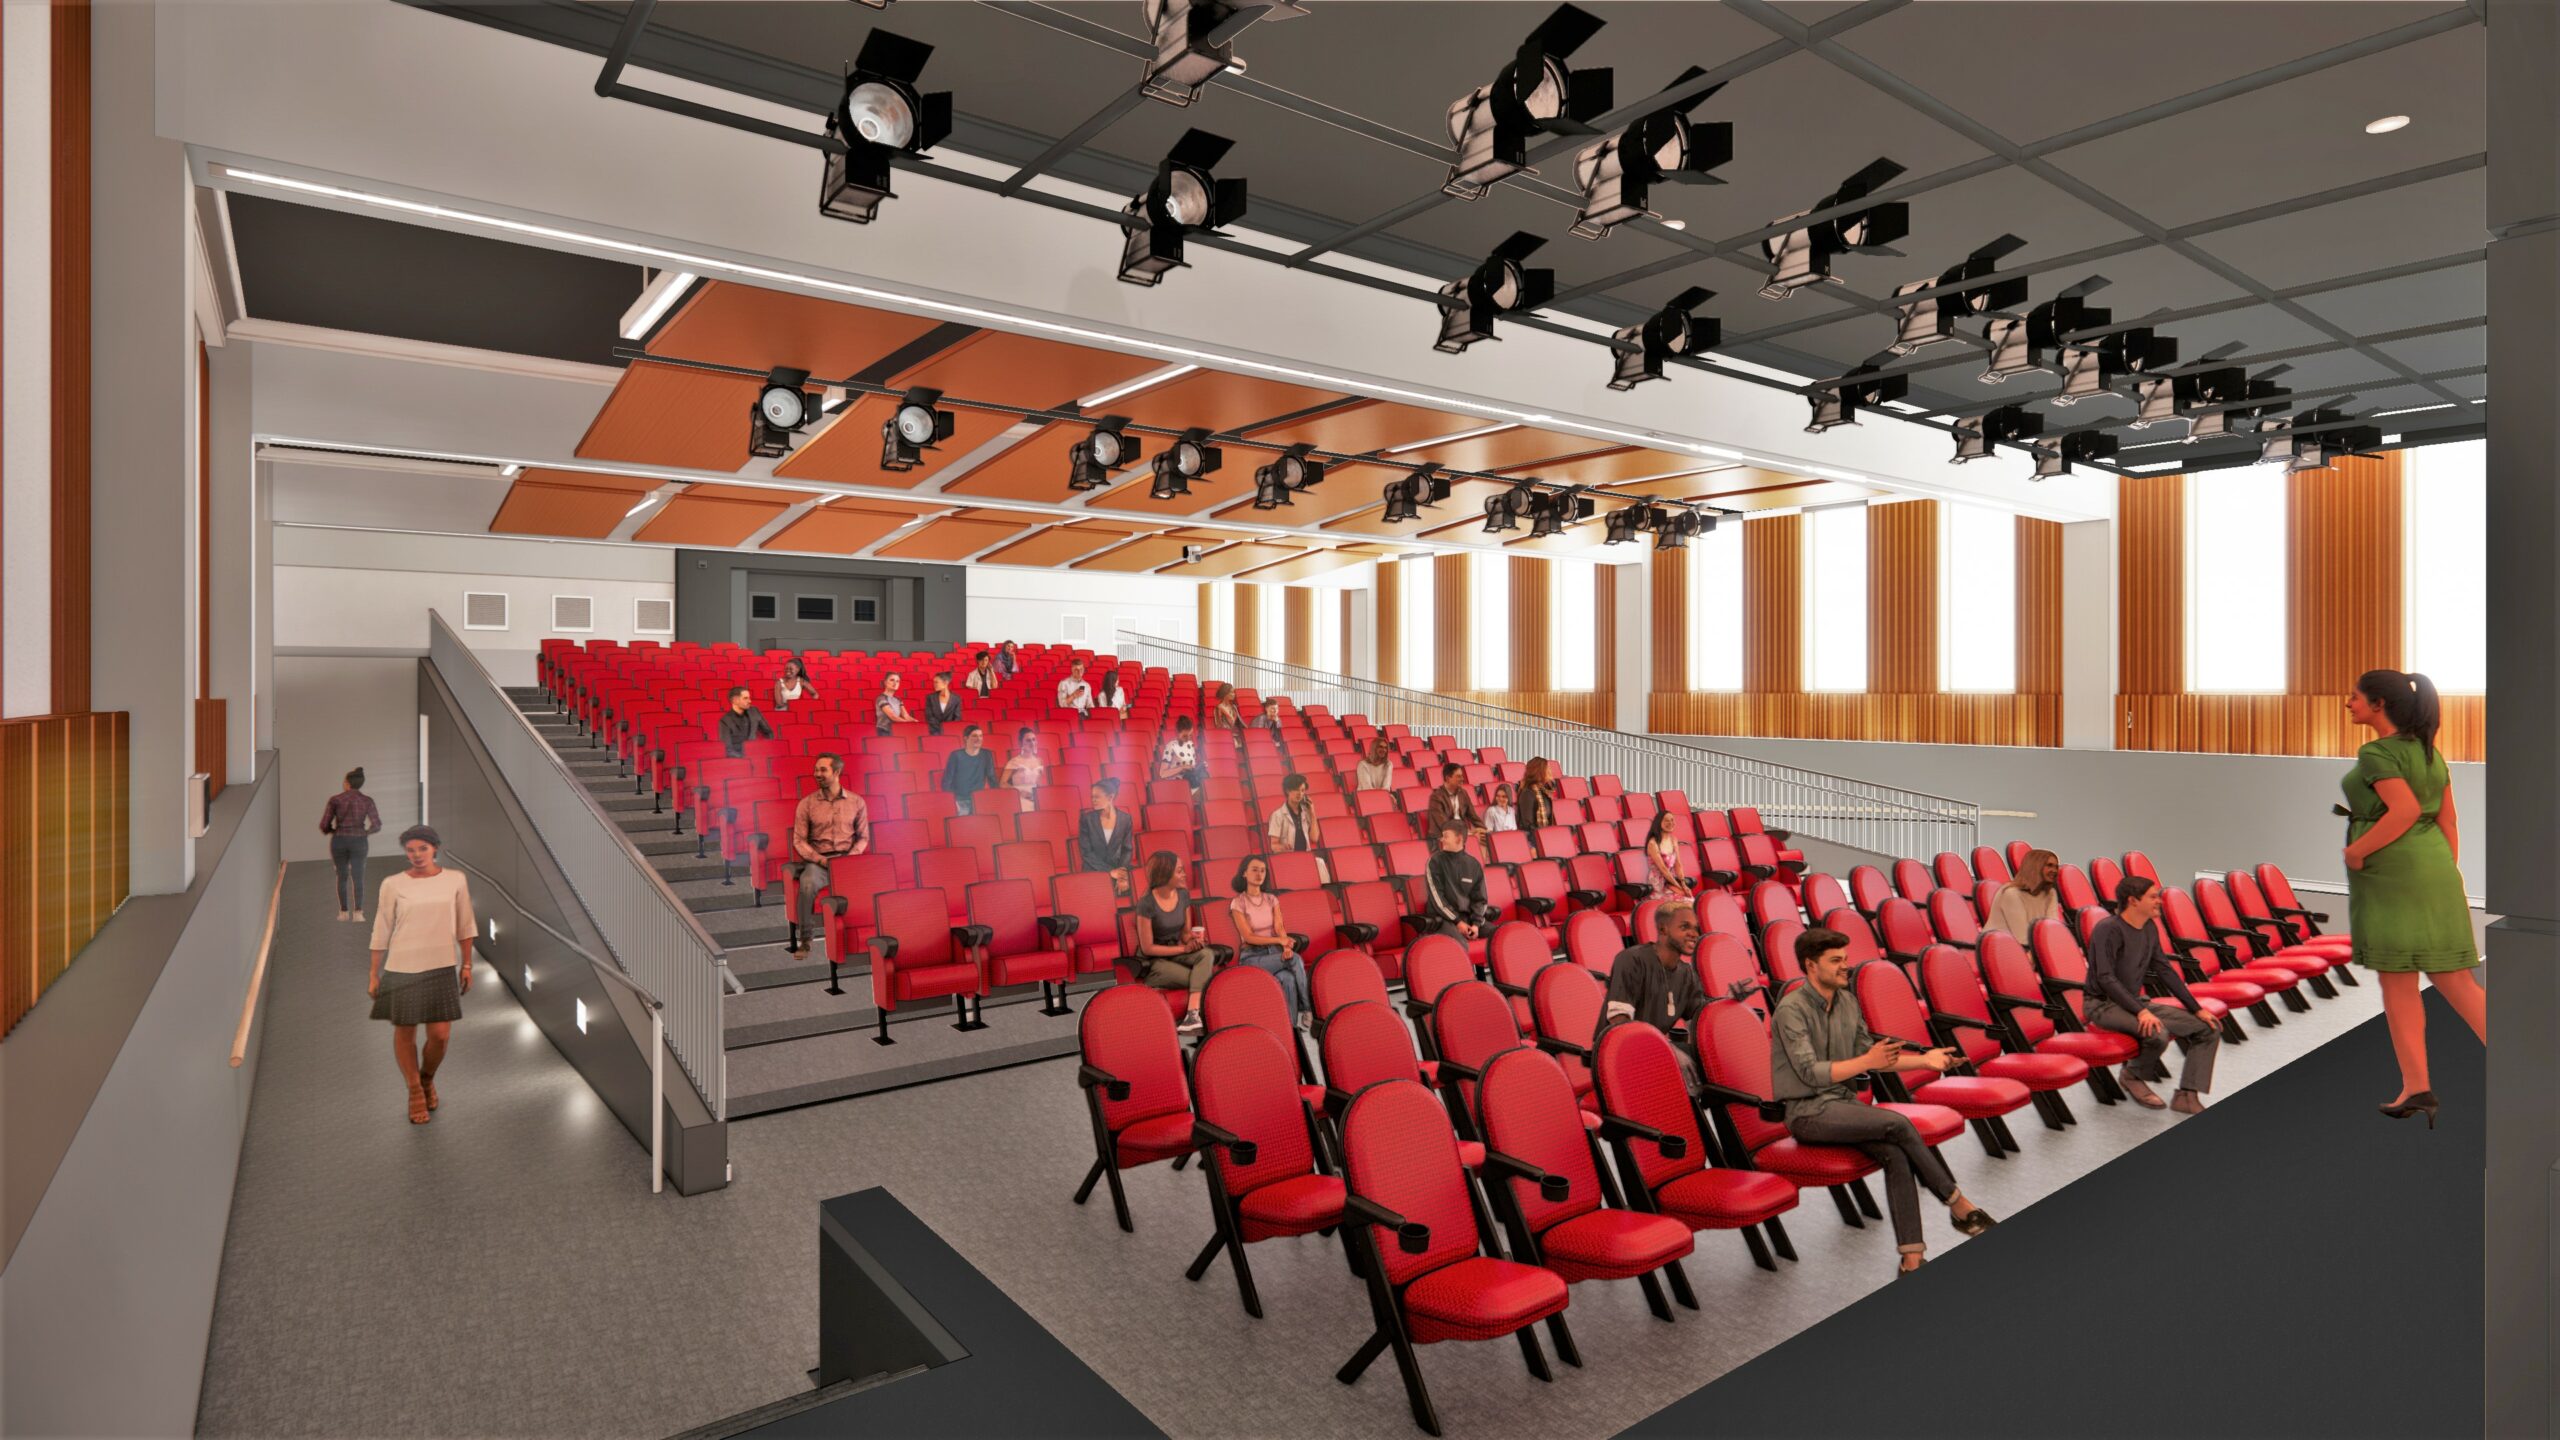 Image shows a rendering of the new Duchesne theater